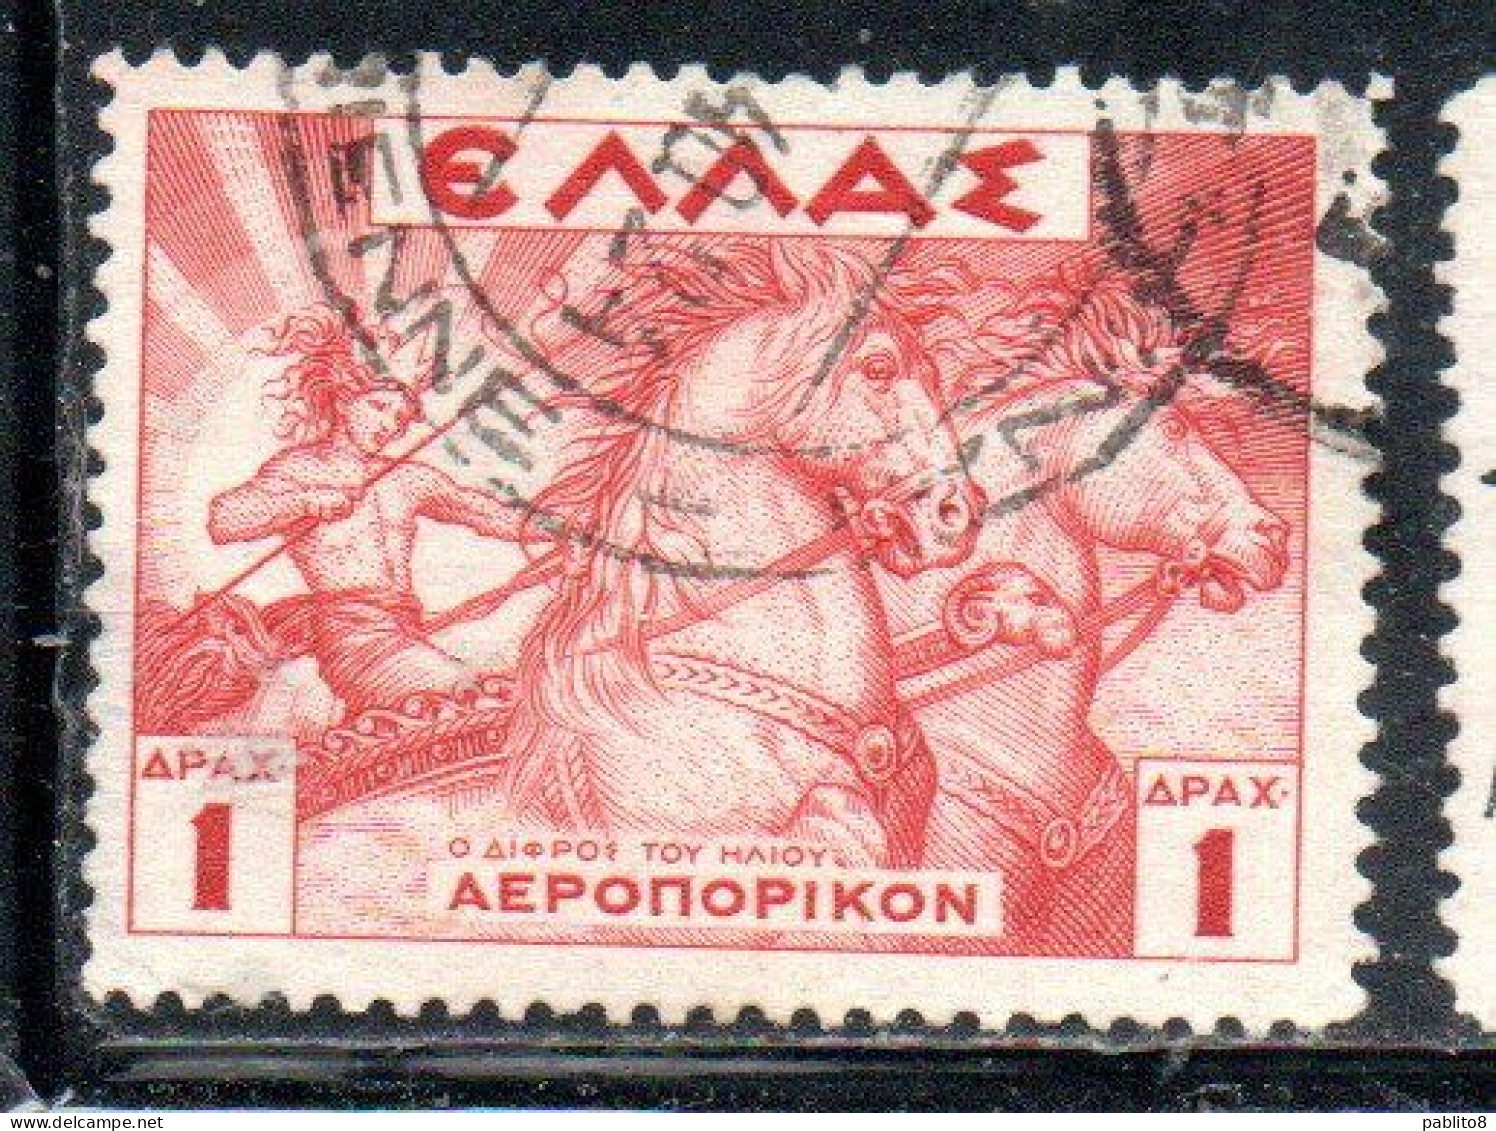 GREECE GRECIA ELLAS 1935 AIR POST MAIL AIRMAIL MYTHOLOGICAL HELIOS DRIVING THE SUN CHARIOT 1d USED USATO OBLITERE' - Used Stamps